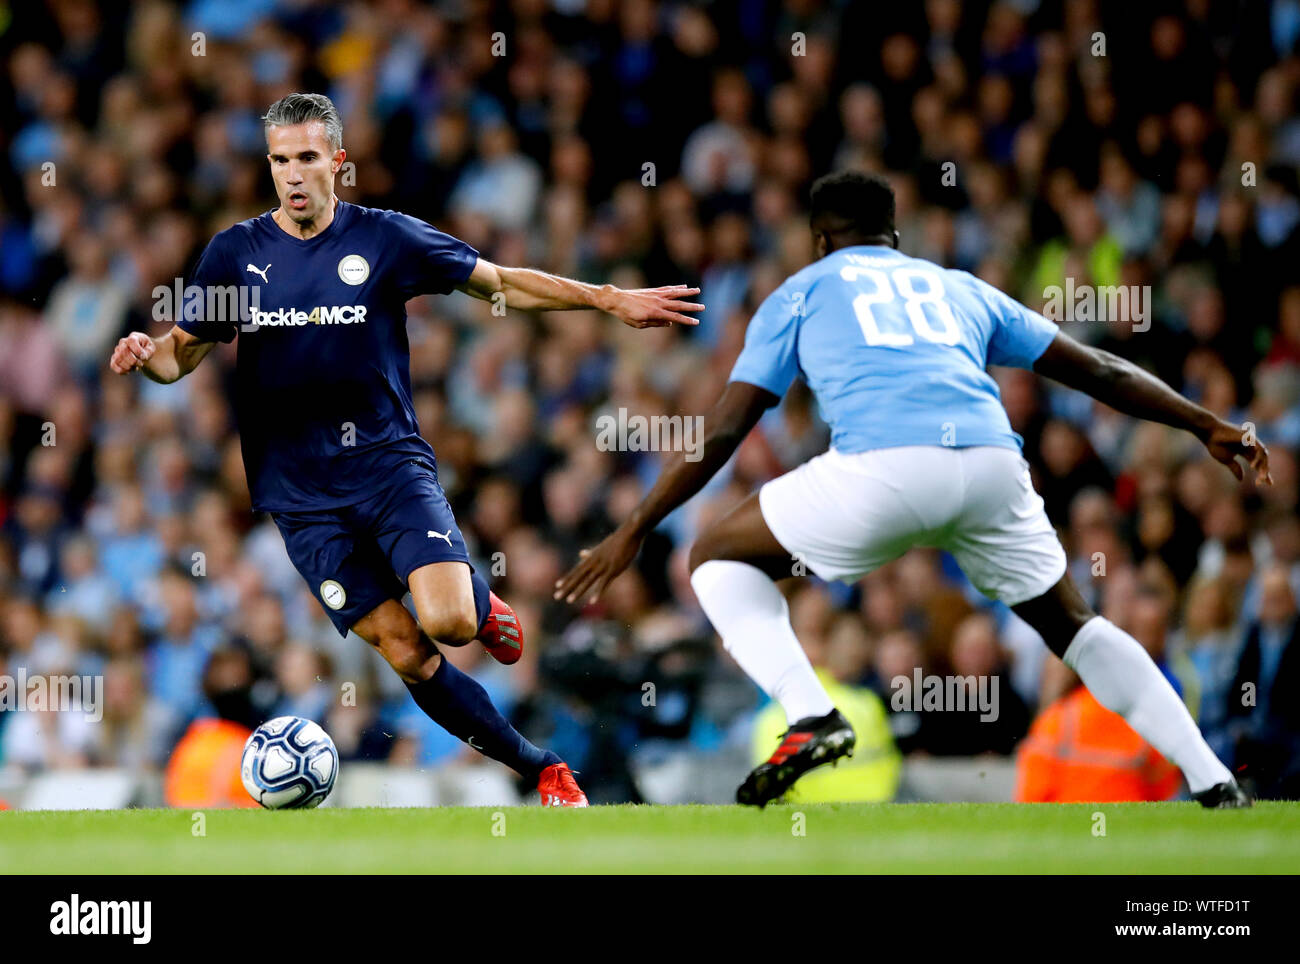 Premier League All Stars XI Robin van Persie (left) and Manchester City Legend's Kolo Toure battle for the ball during the Vincent Kompany Testimonial at the Etihad Stadium, Manchester. Stock Photo